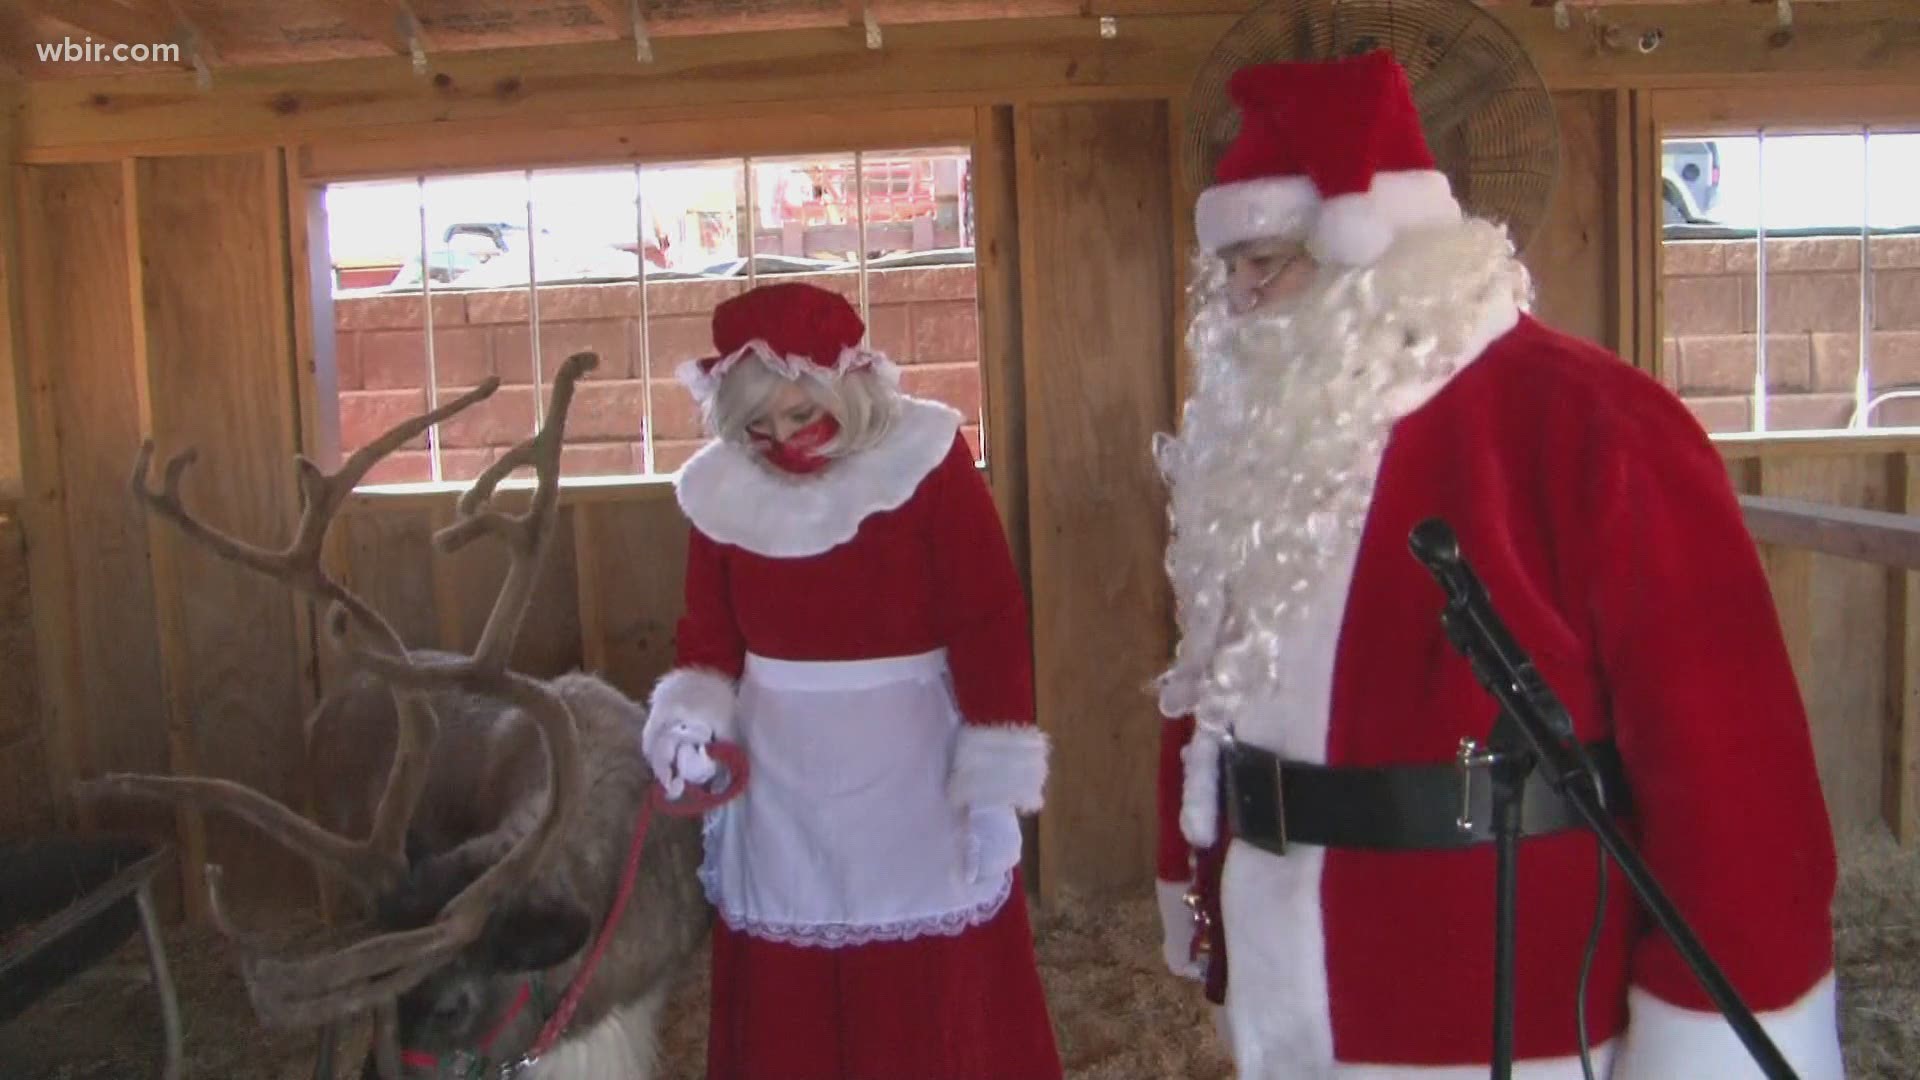 Reporter Katie Inman explains how the jolly old elf relies on a farm in the foothills for holiday backup.